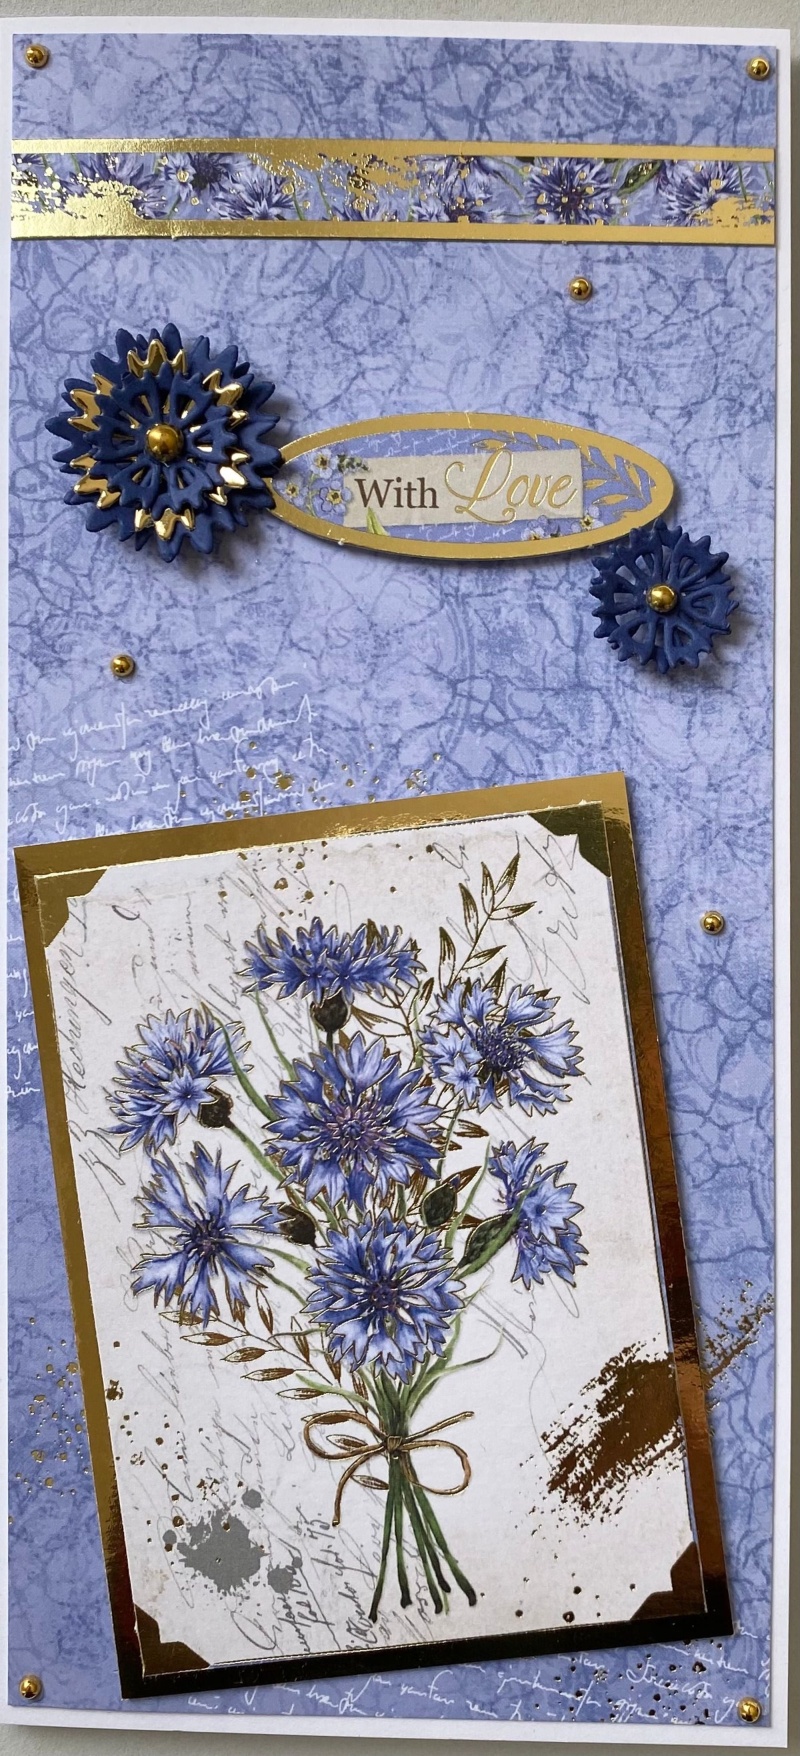 Forever Florals - Wildflowers Luxury Topper Collection With 2 X Bonus Topper Sheets